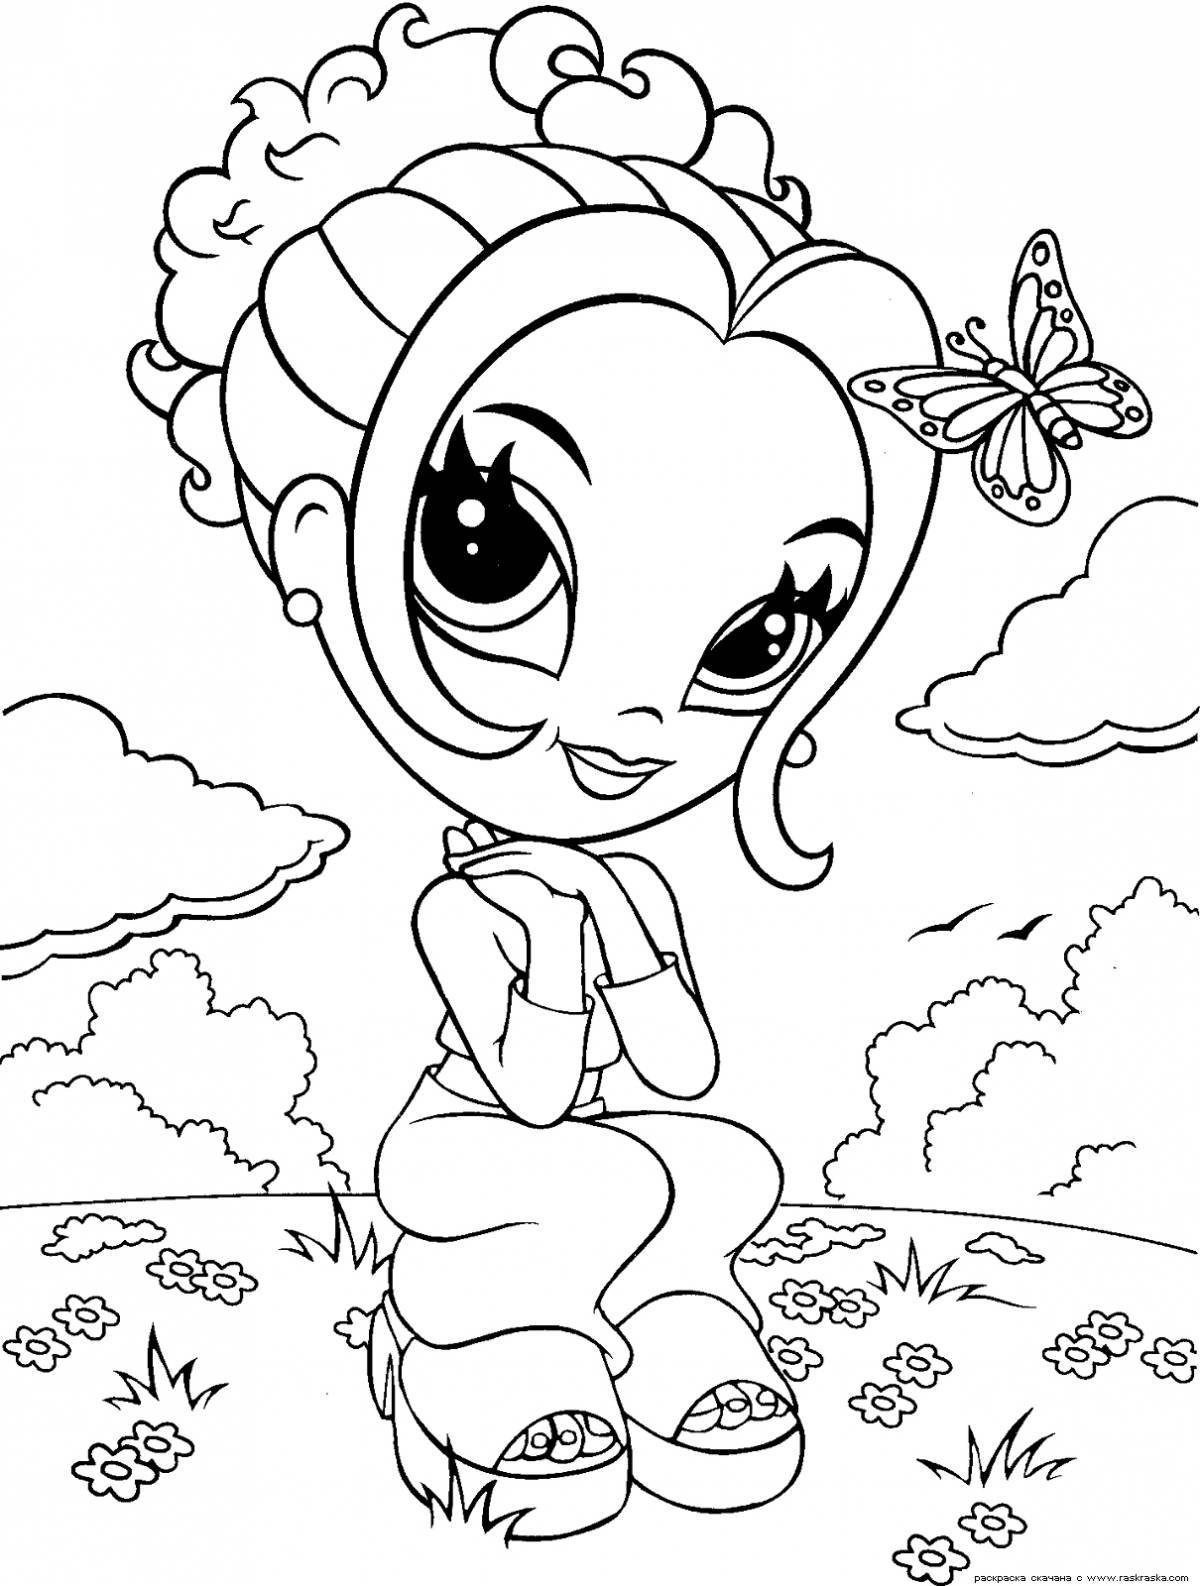 Crazy coloring book for girls 7 years old